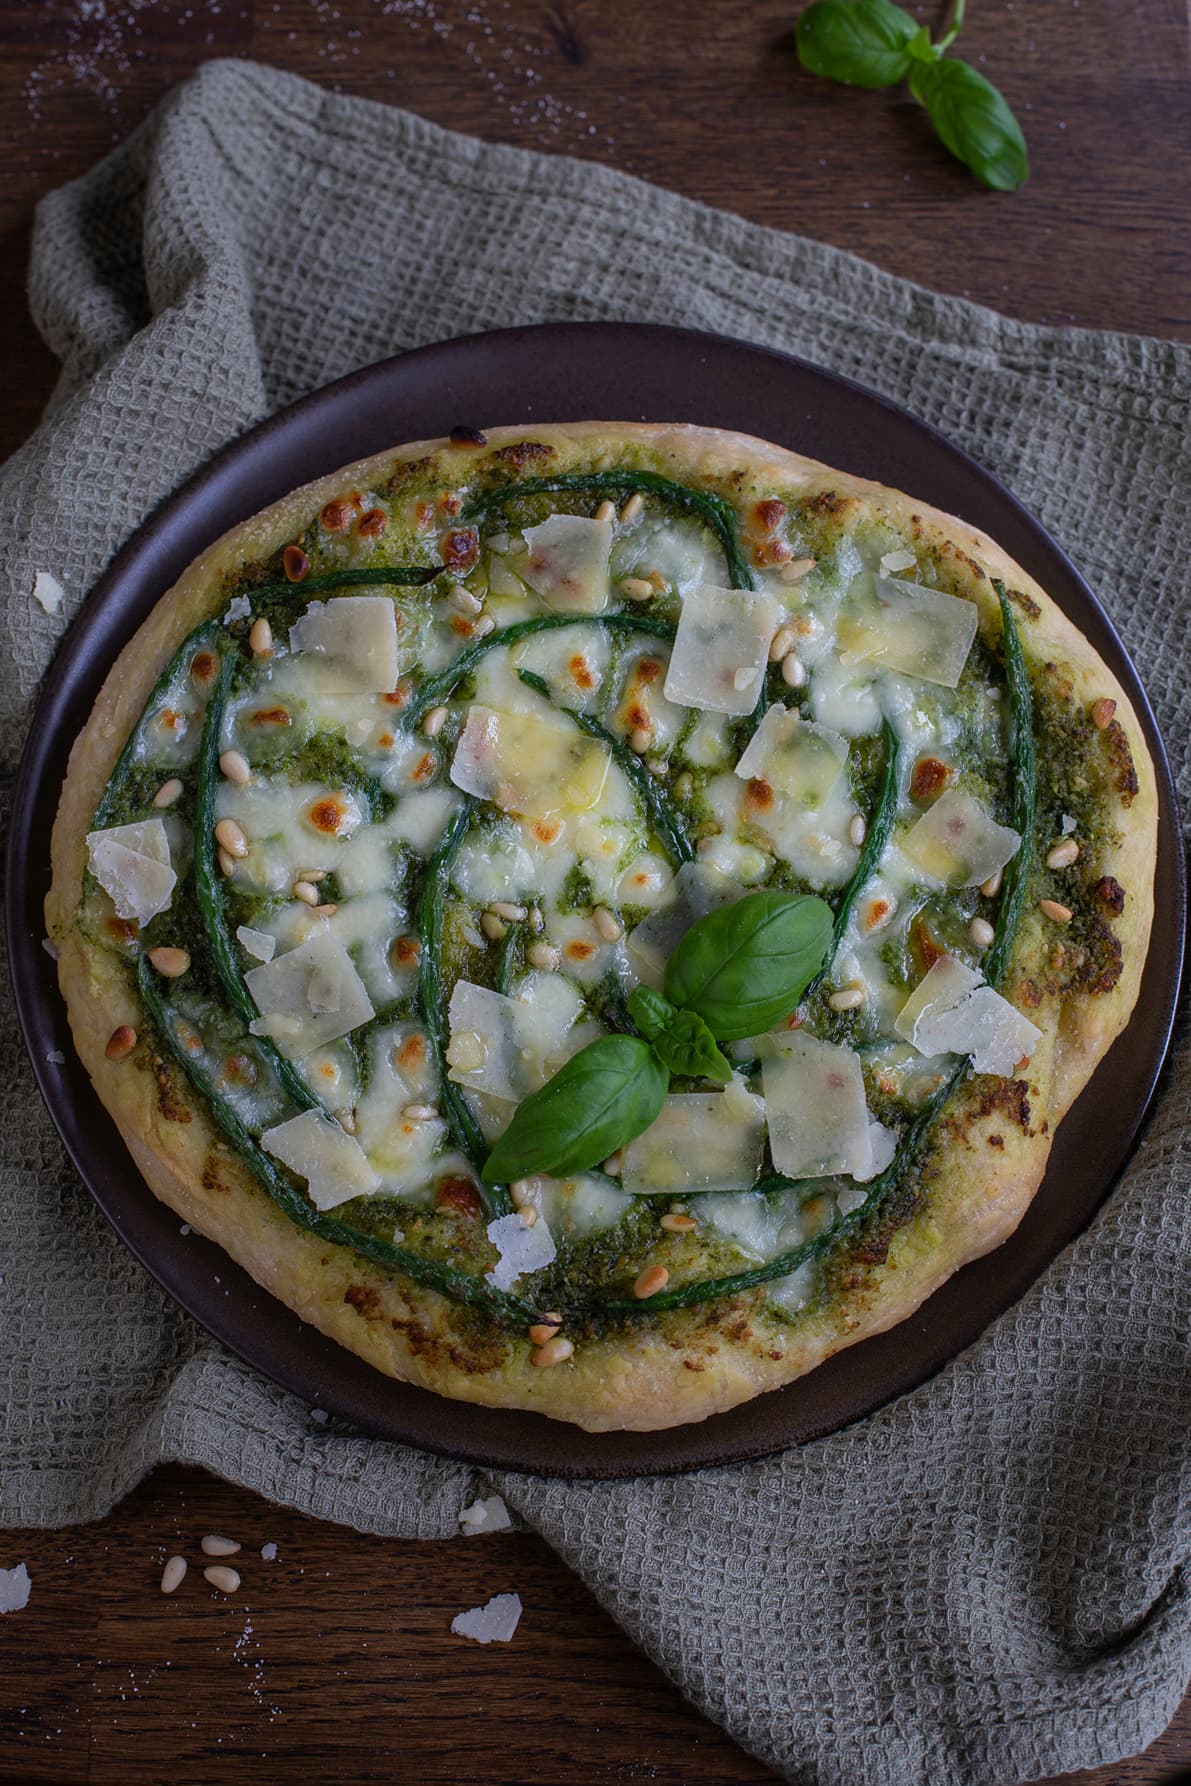 Pesto pizza with green beans seen from above.